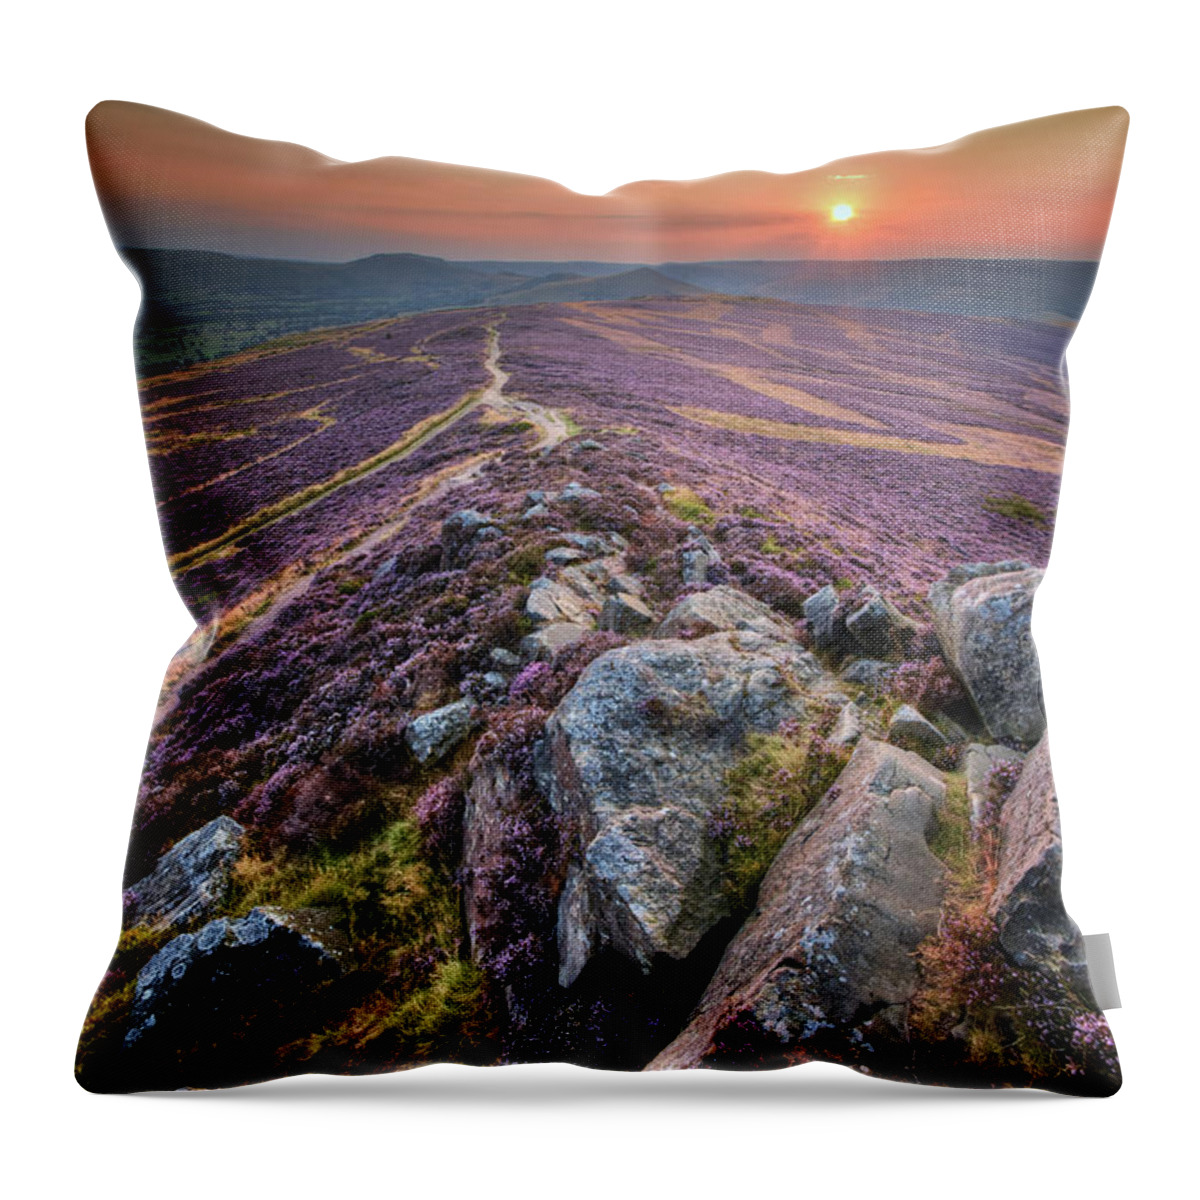 Flower Throw Pillow featuring the photograph Win Hill 1.0 by Yhun Suarez